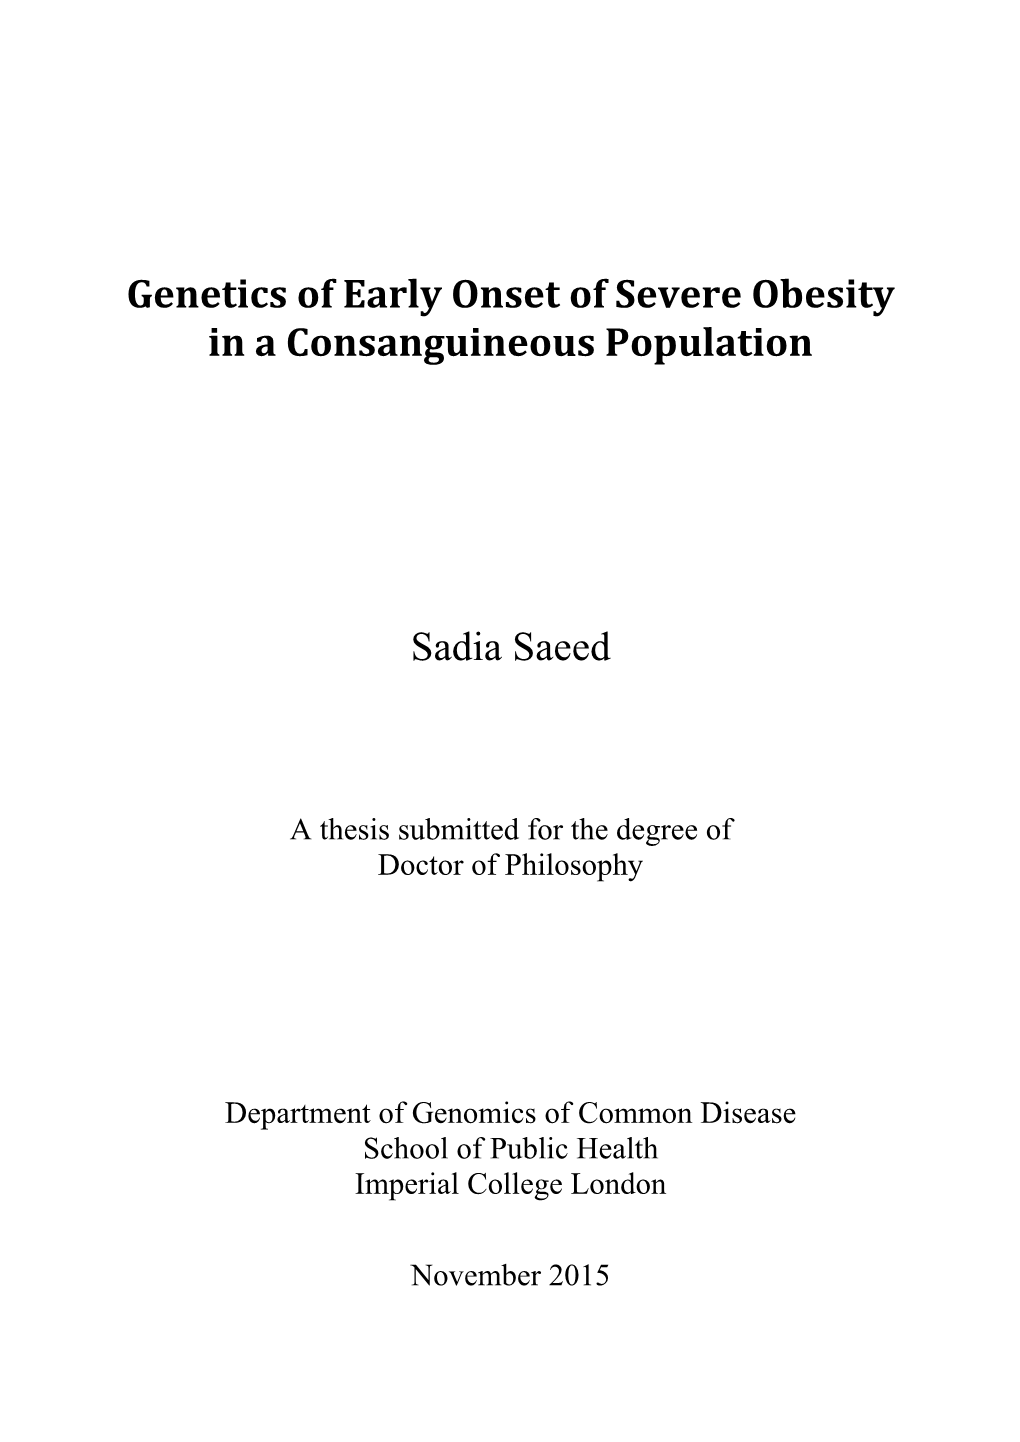 Genetics of Early Onset of Severe Obesity in a Consanguineous Population Sadia Saeed